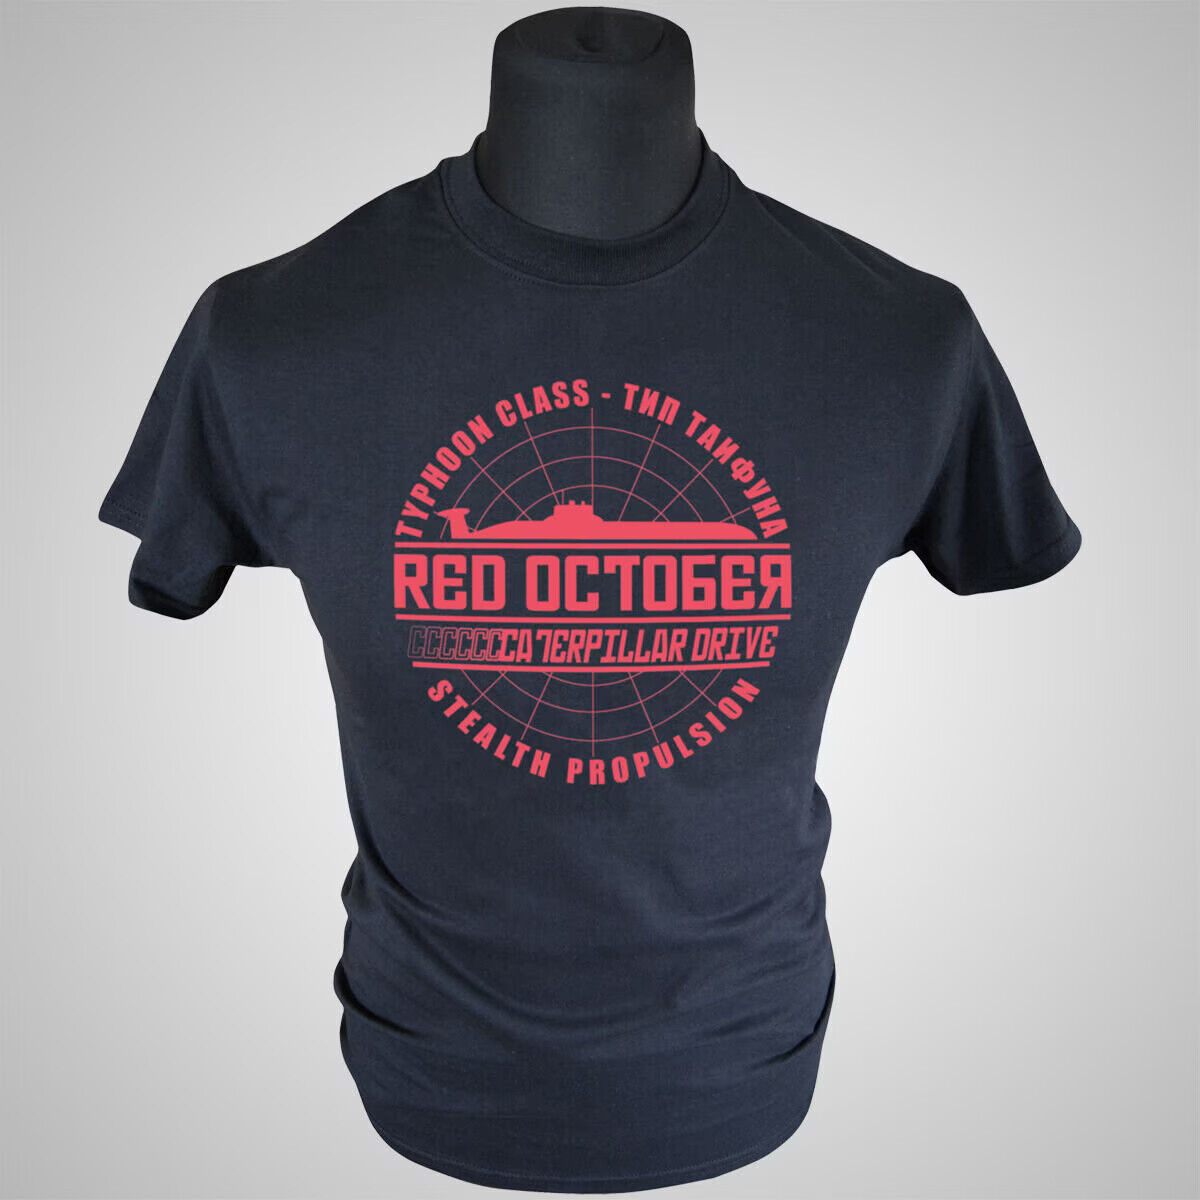 Red October T Shirt (Colour Options)